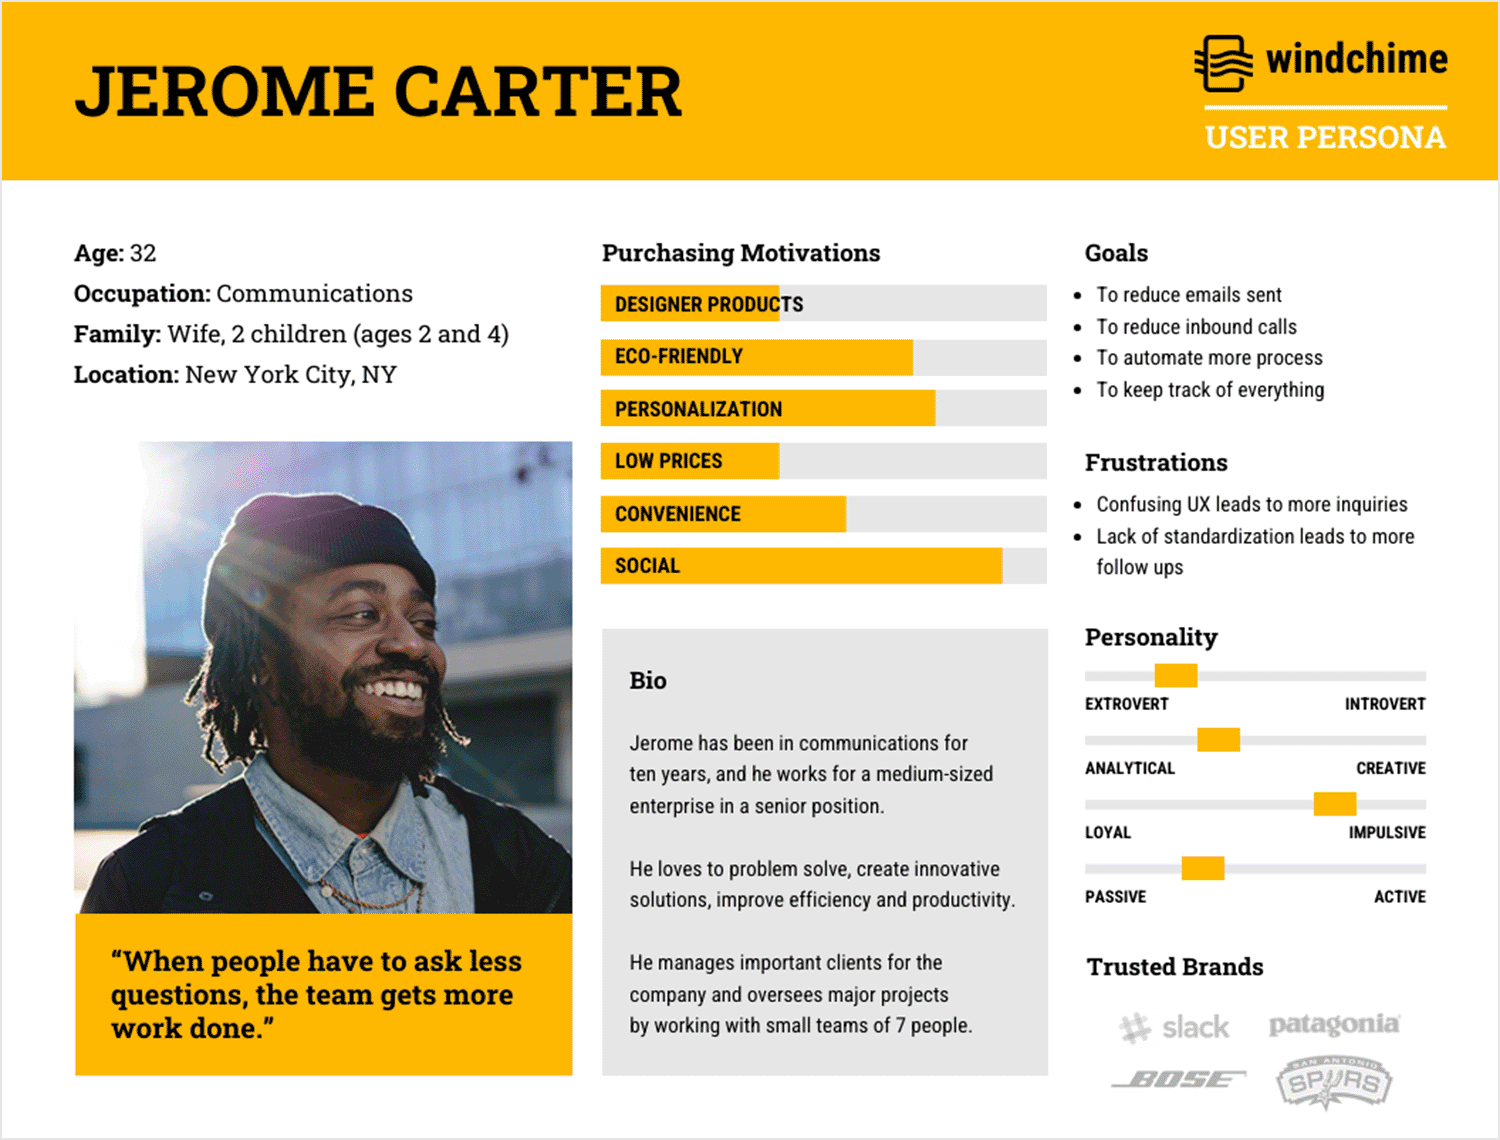 A user persona template showcasing a communications professional with details about his goals, frustrations, and purchasing preferences, designed for clarity and engagement